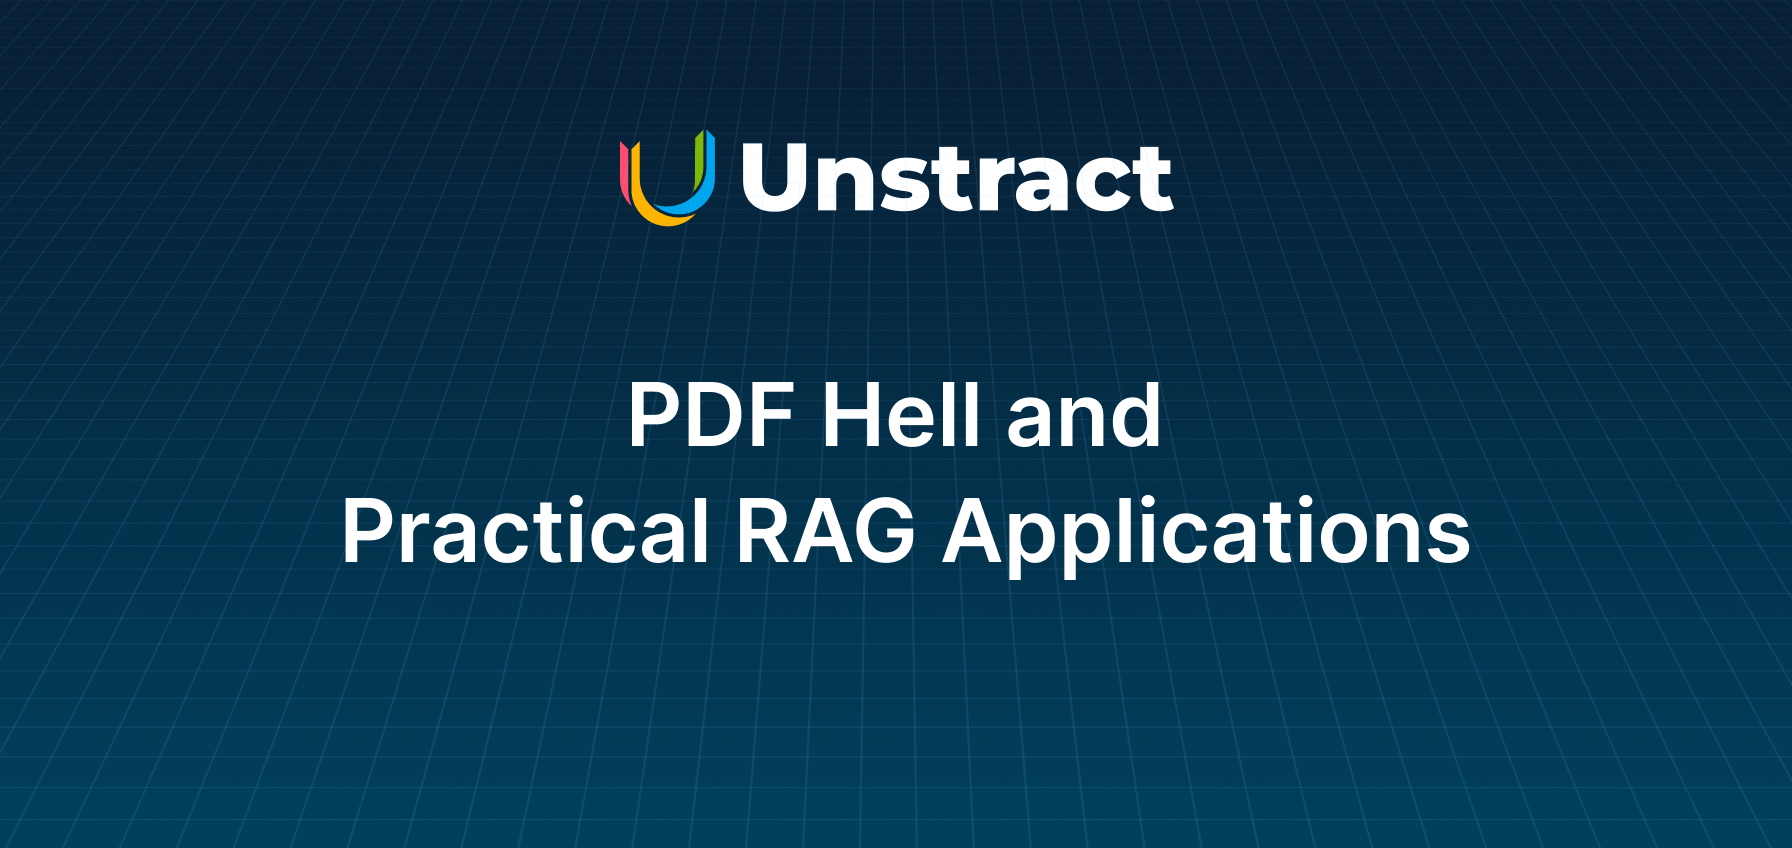 PDF Hell and Practical RAG Applications